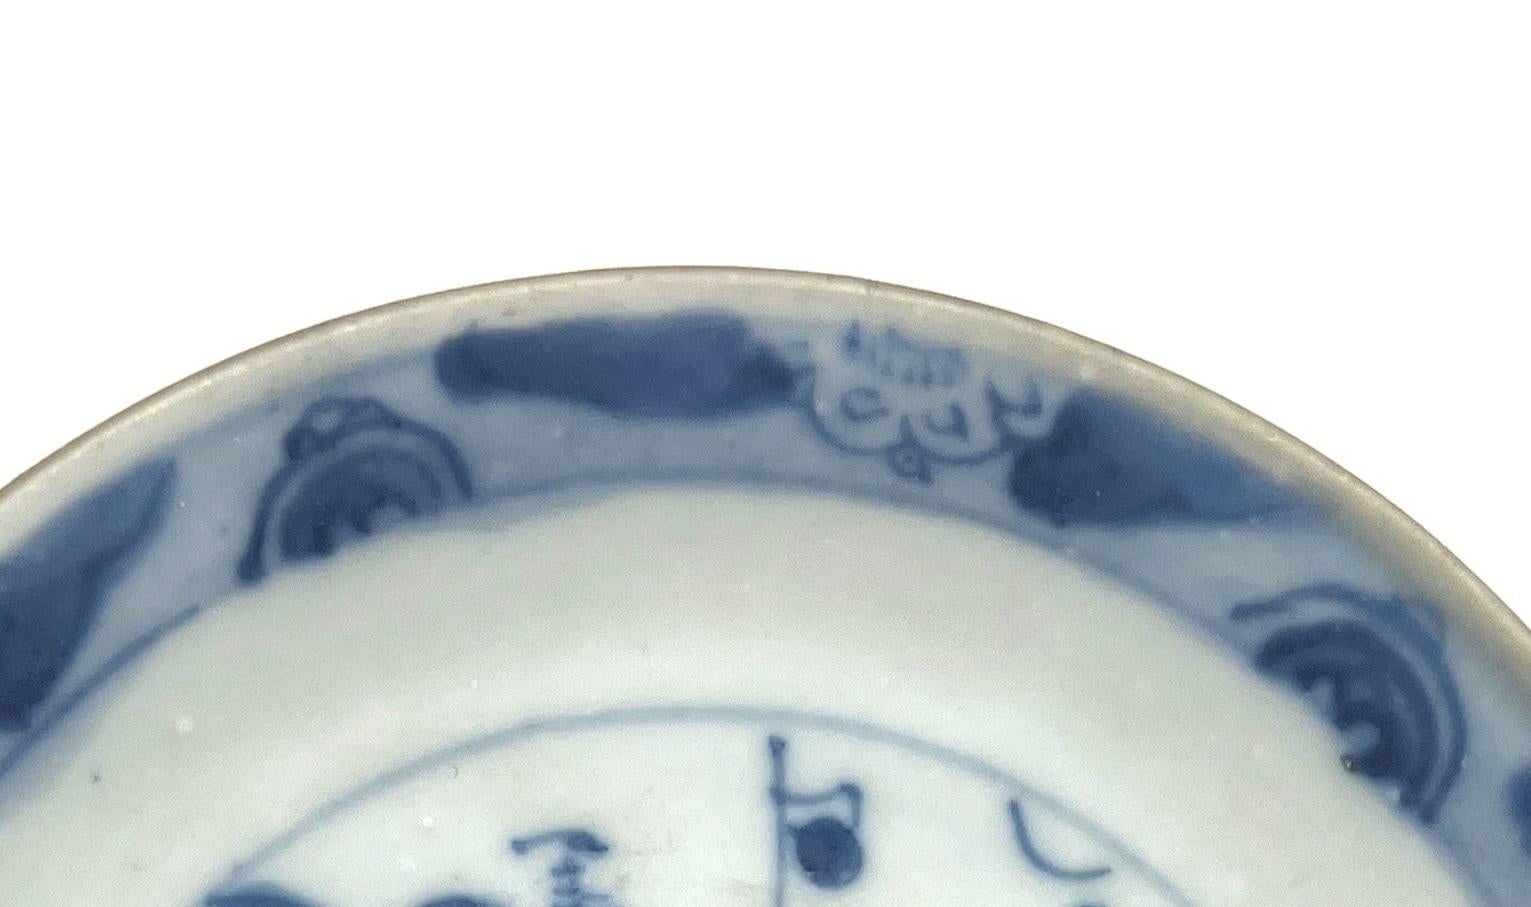 Chinese Passing Boat And Bridge Saucer C 1725, Qing Dynasty, Yongzheng Period